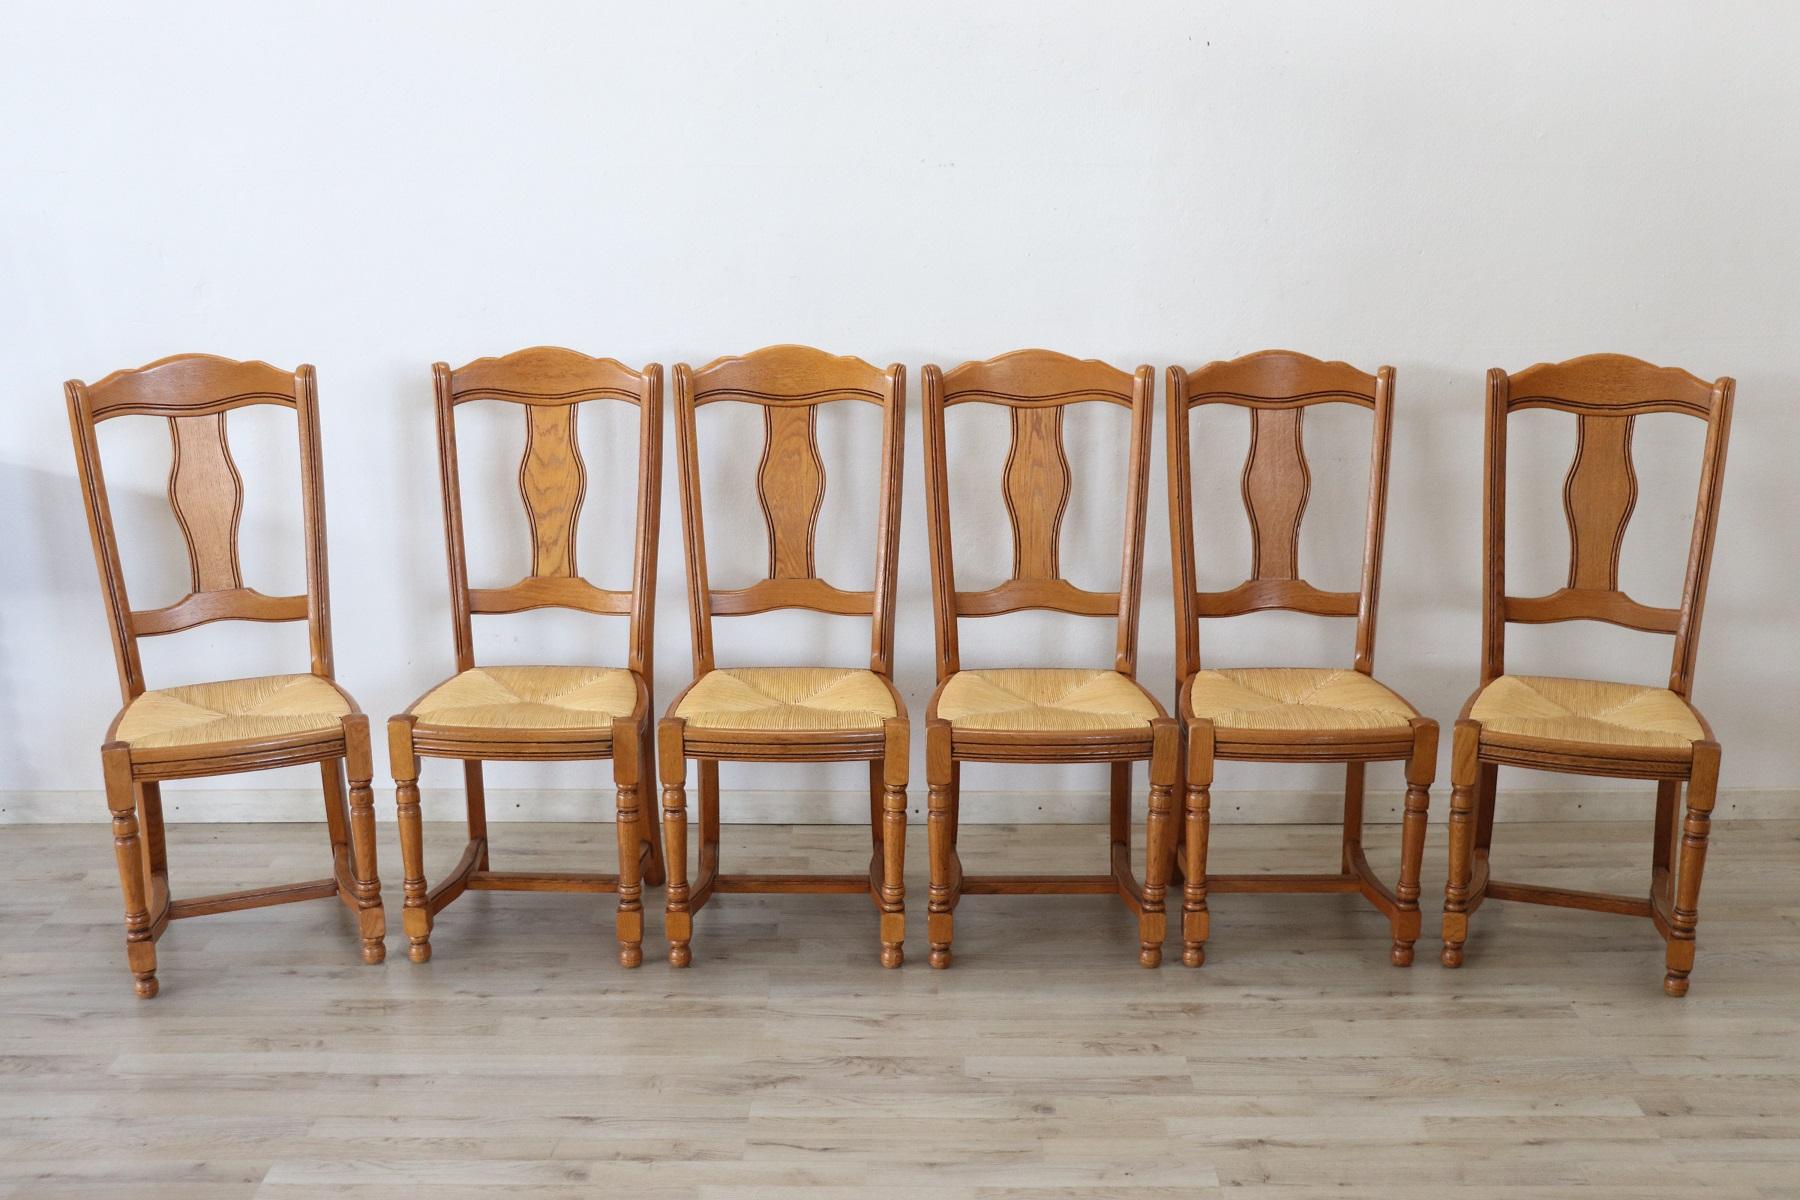 20th century Italian classical style dining room set of six chairs in solid oakwood. The chairs are very elegant and linear with turned legs. The seat is wide and comfortable in rustic straw. The chairs are in perfect condition ready to be used in